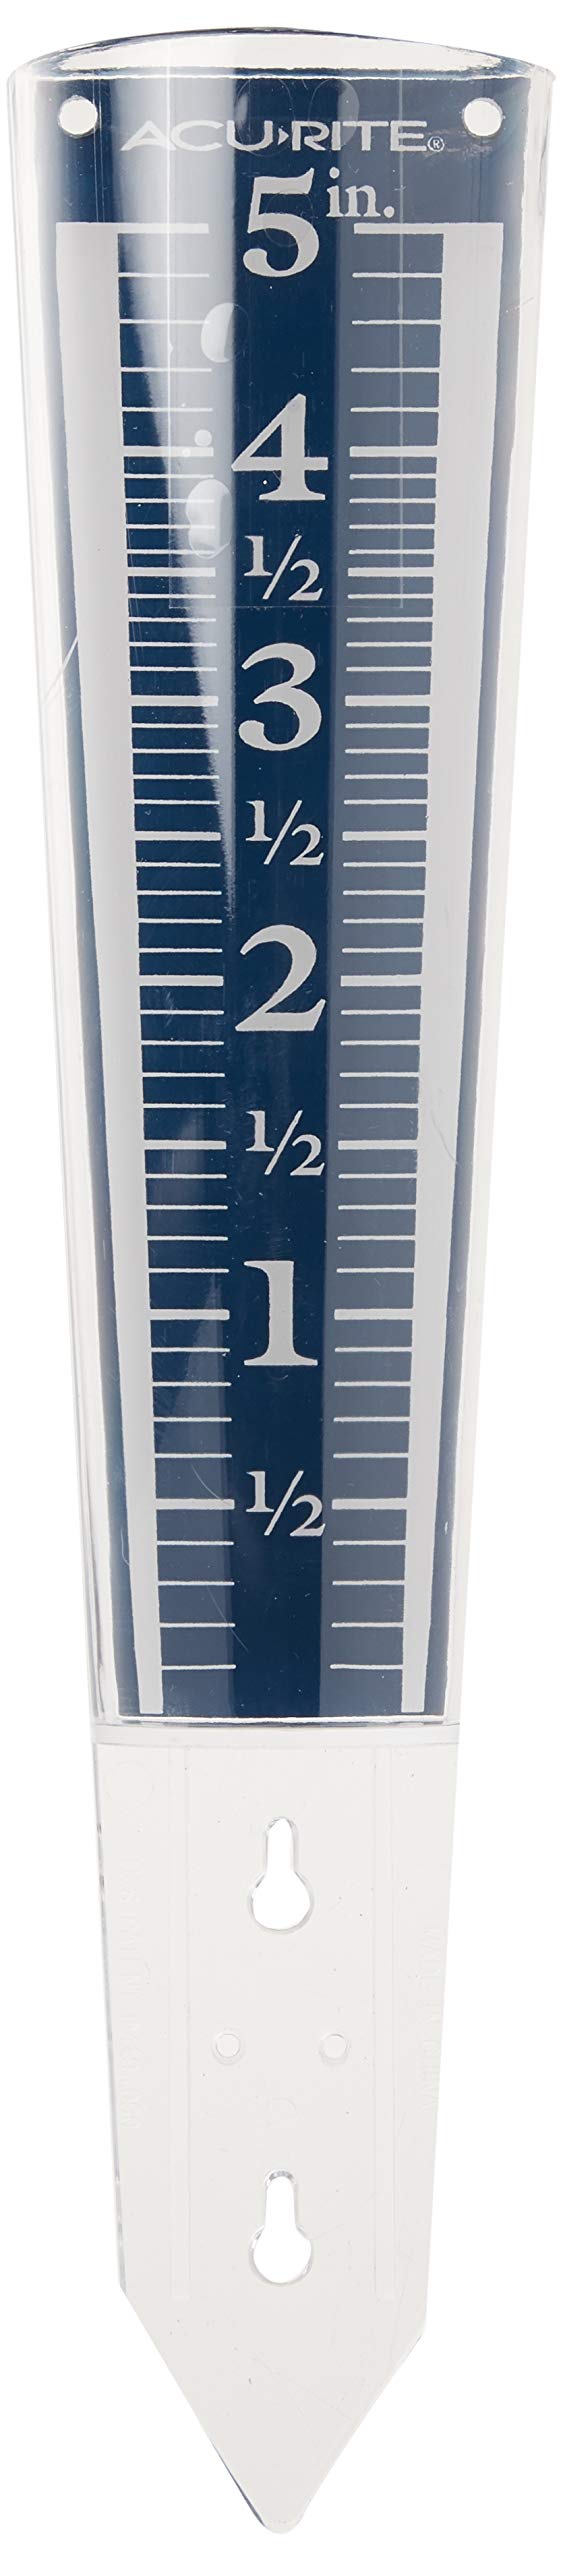 AcuRite 5" Capacity Easy-to-Read Magnifying Acrylic, Blue (00850A3) Rain Gauge Acrylic Magnifying